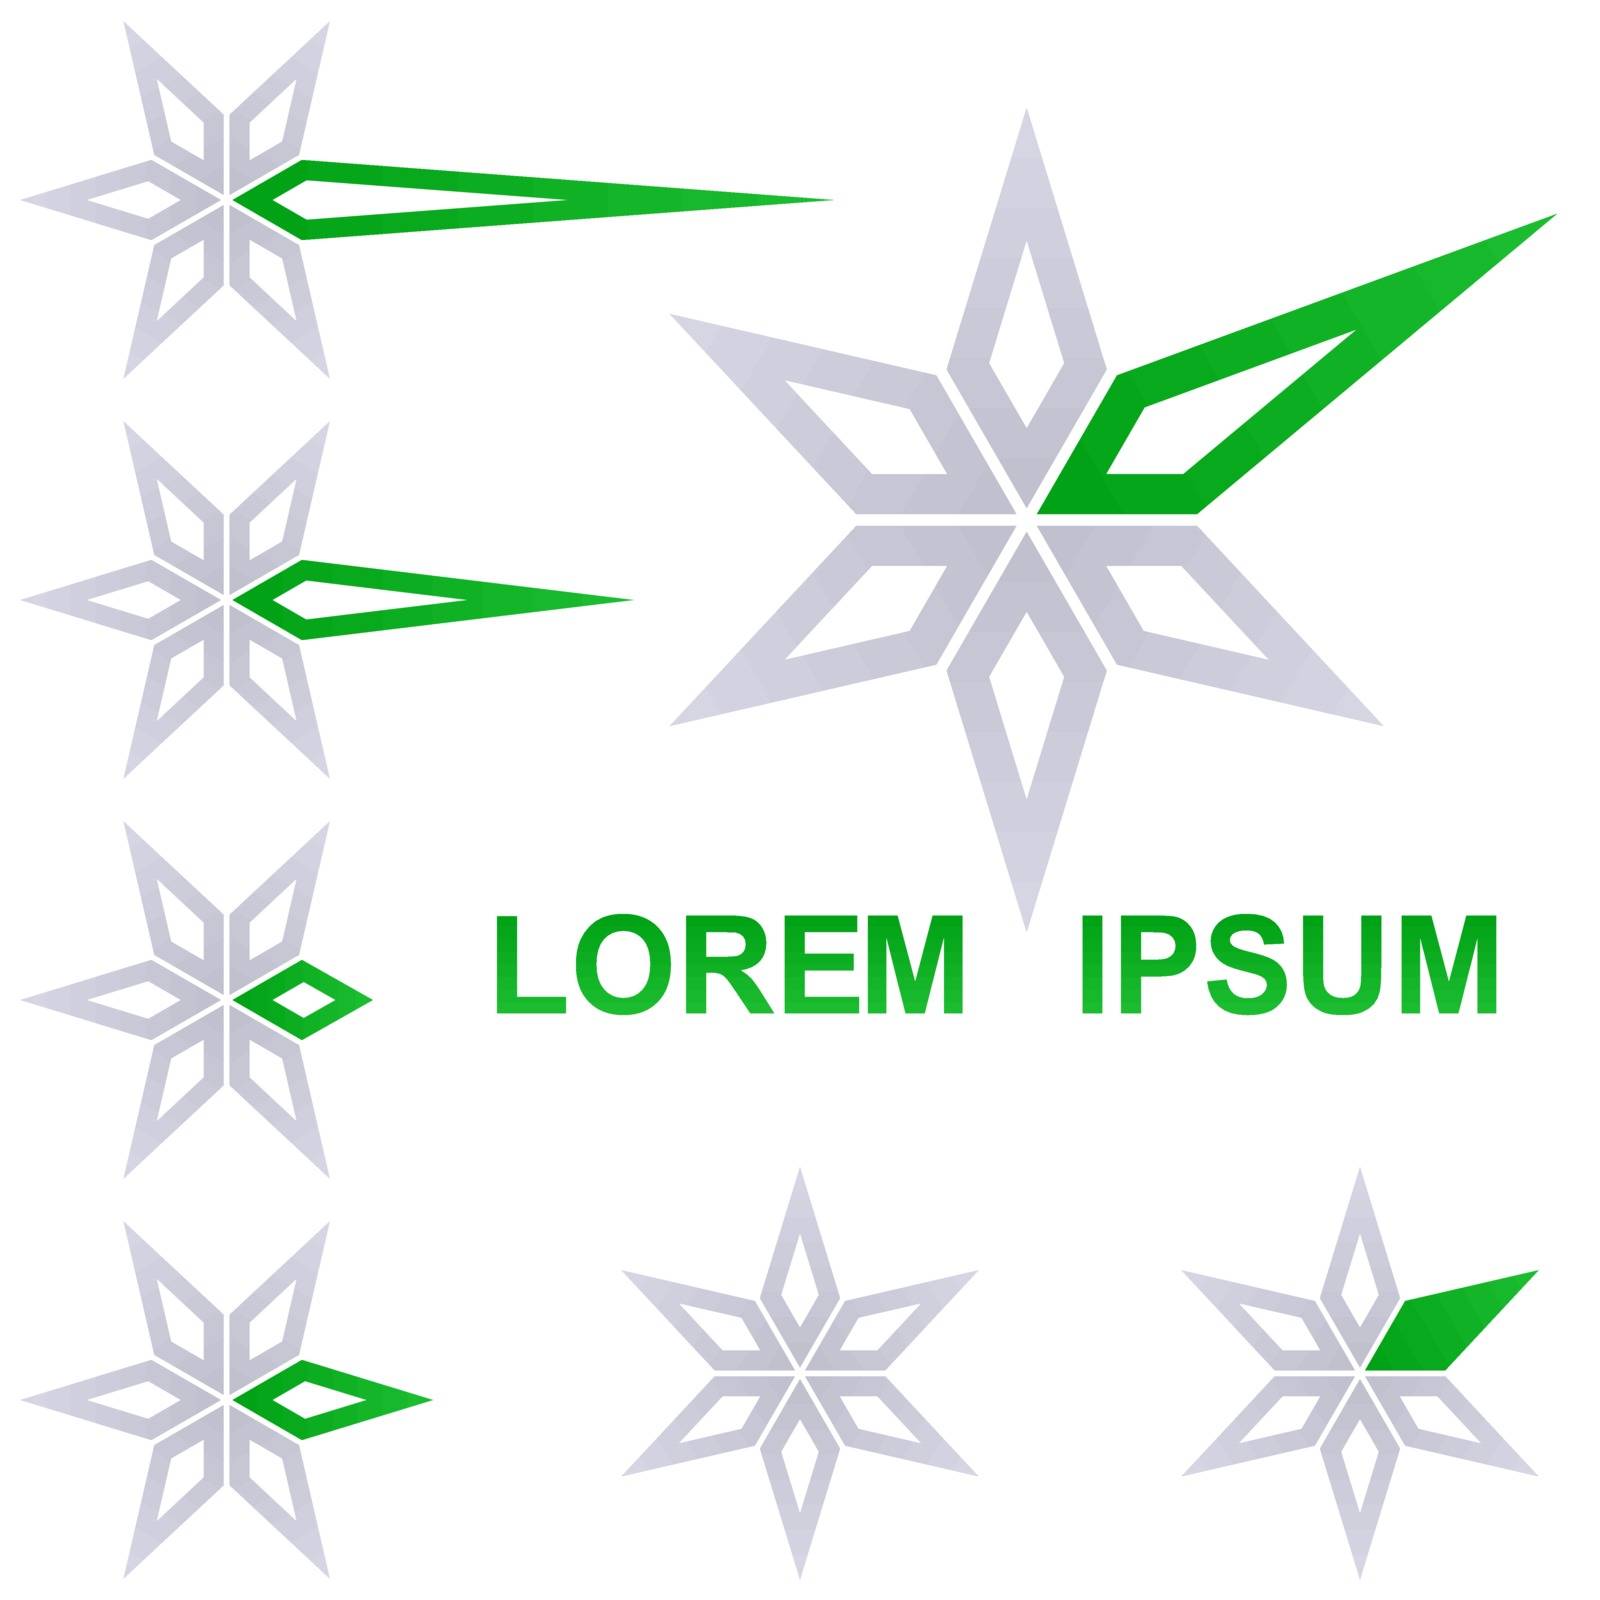 Grey and green star symbol business icon design set